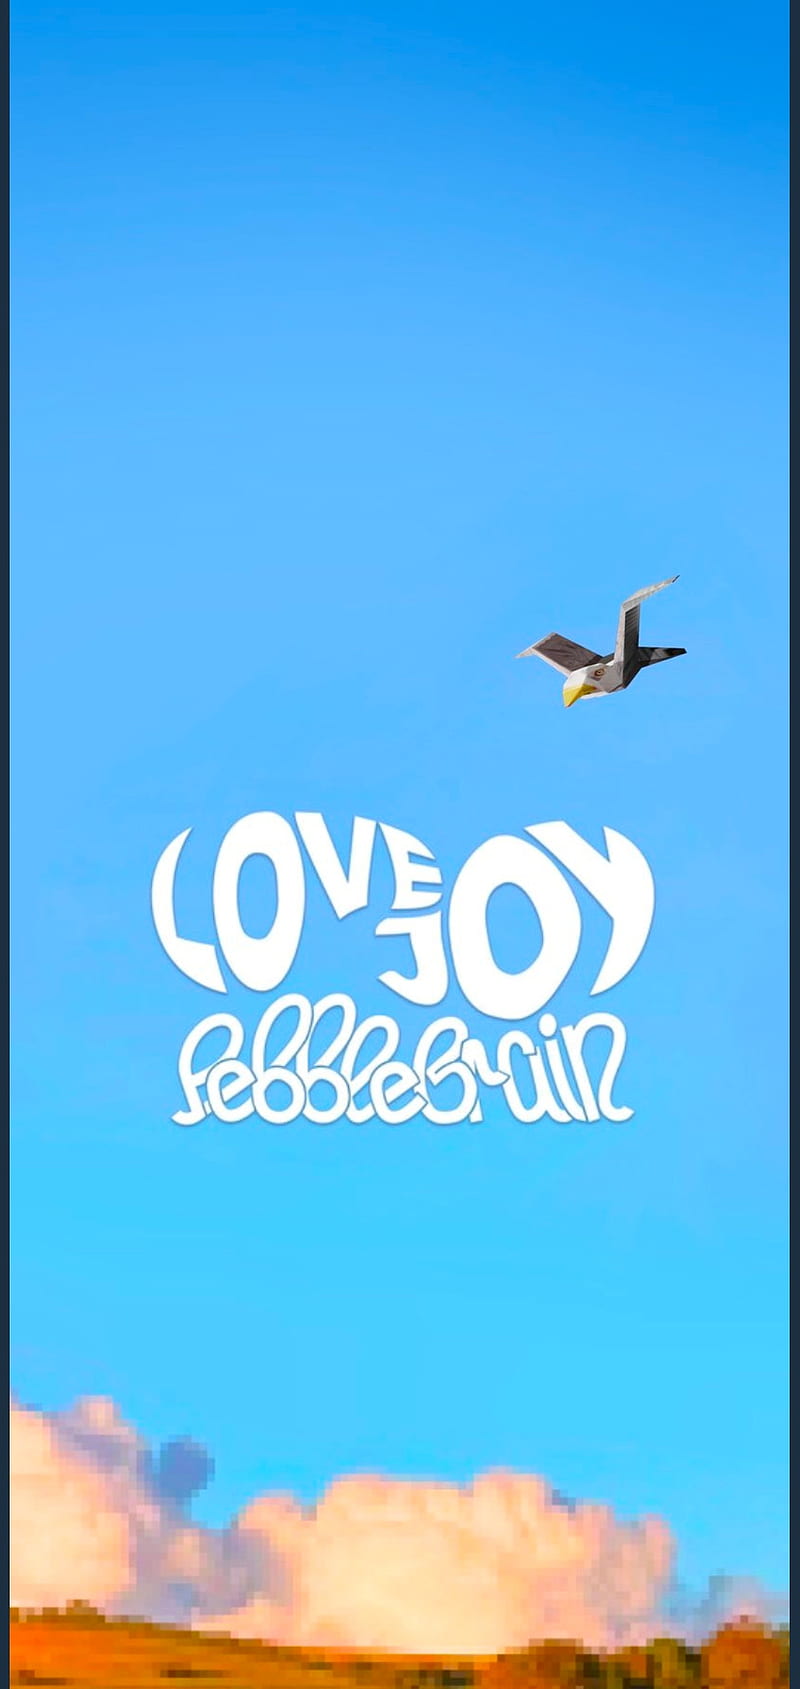 I made wallpapers for Lovejoy Hope you guys like them  rlovejoyband